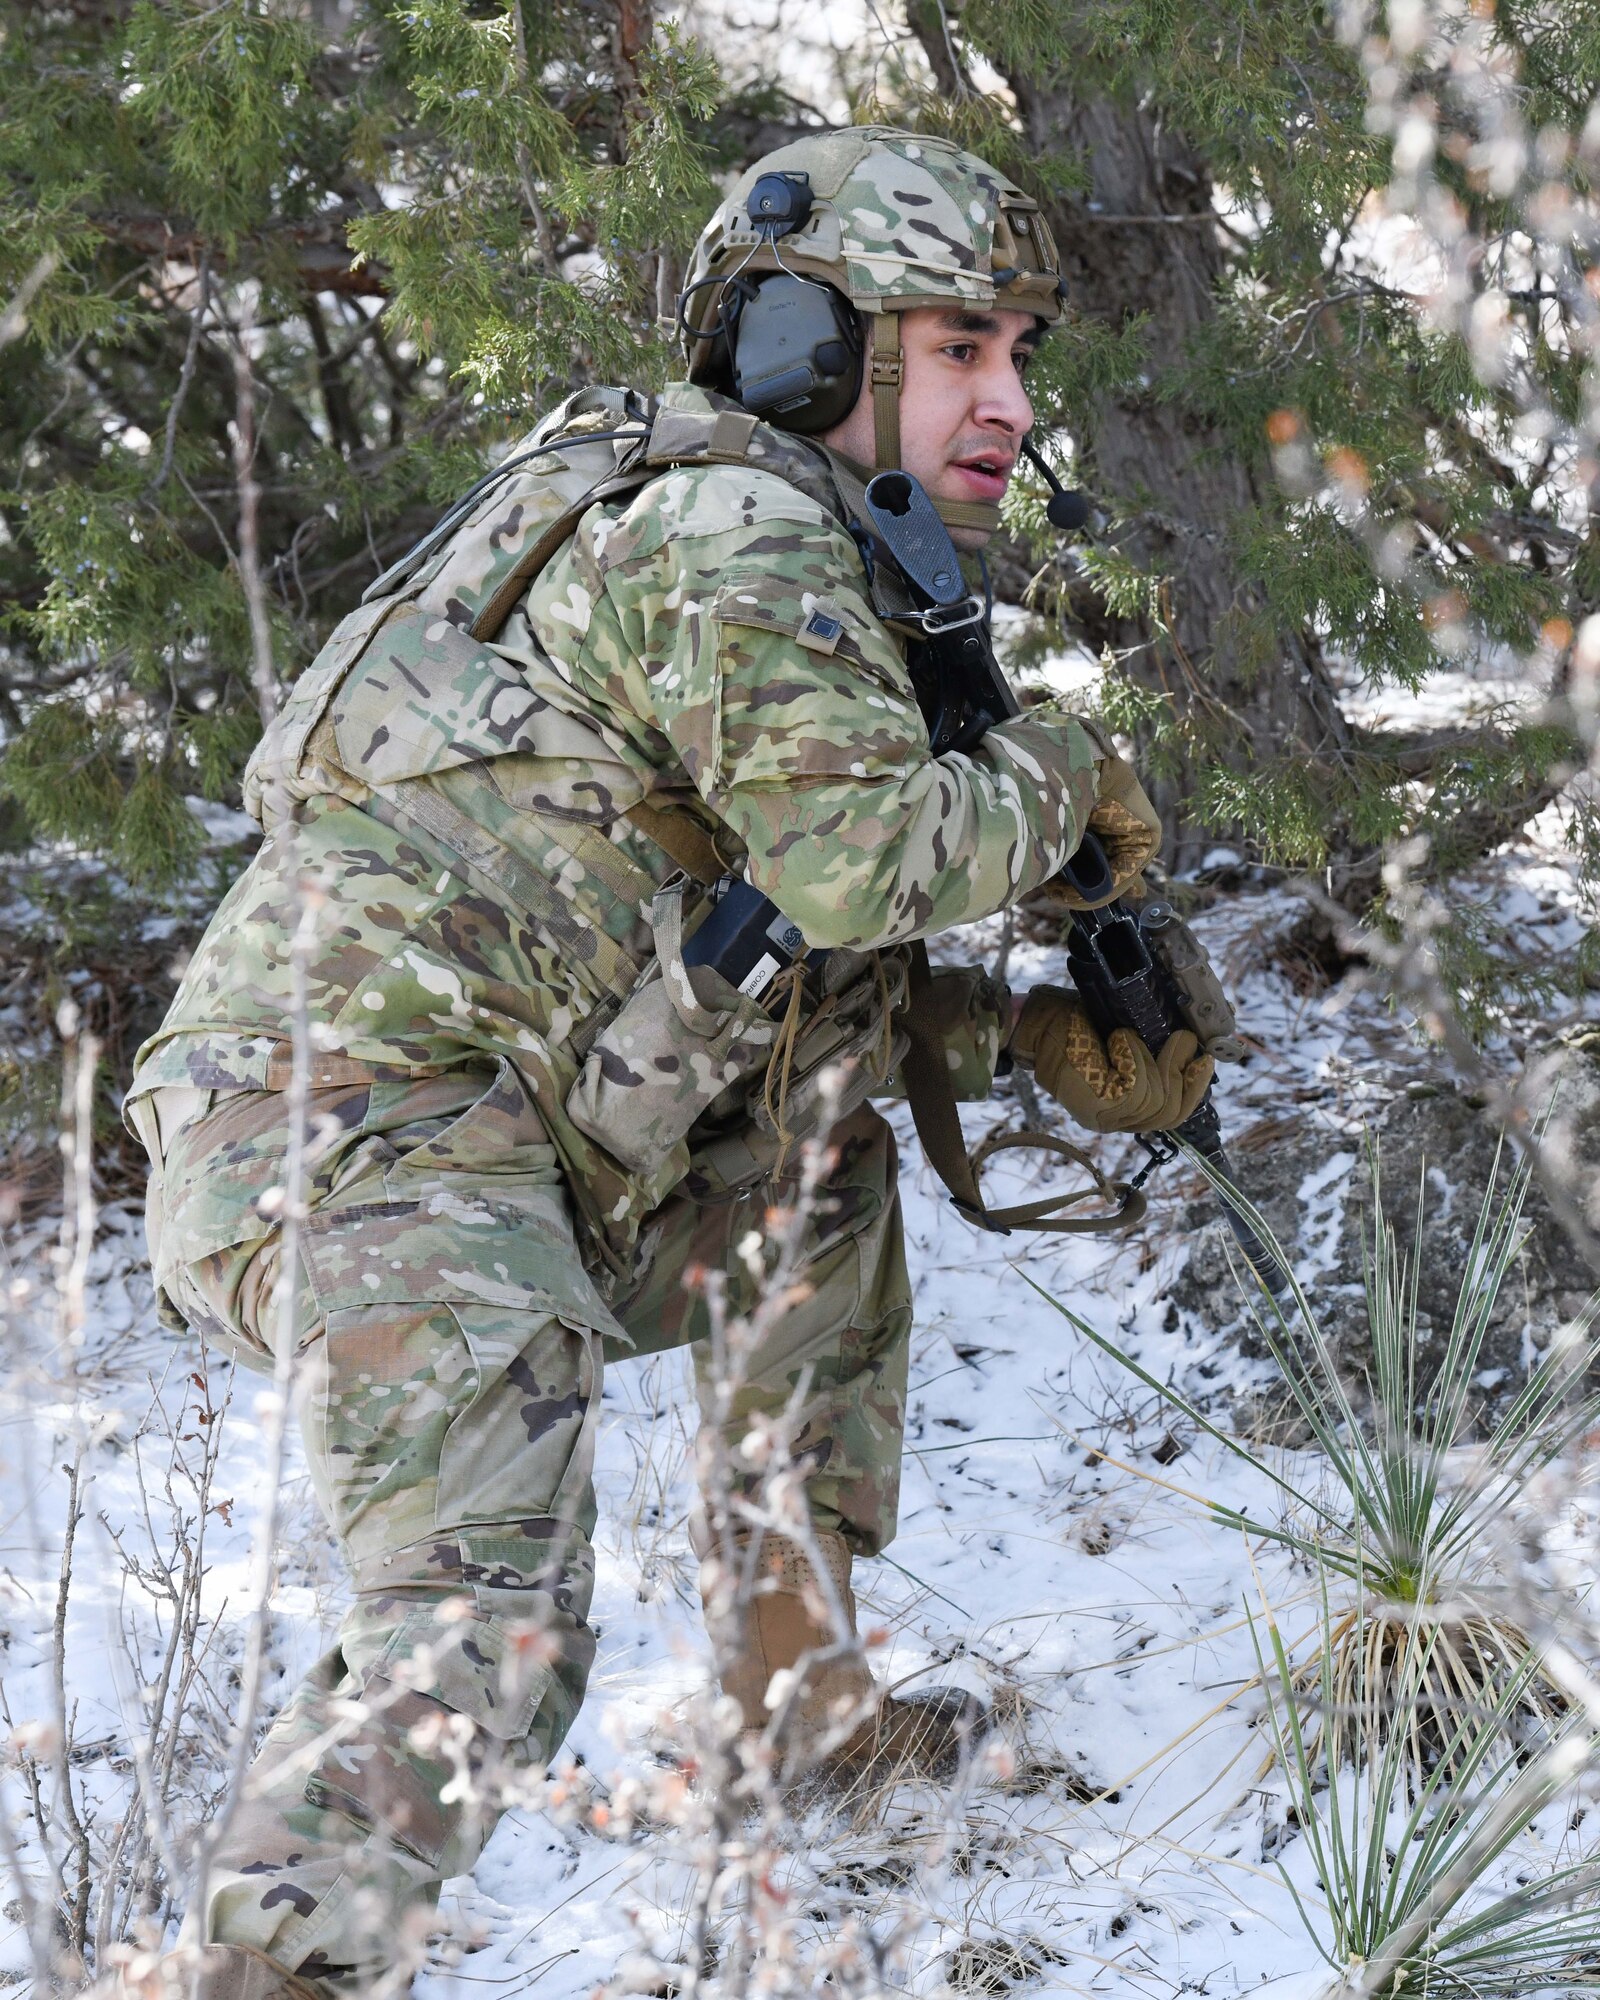 Senior Airman Pablo Archuleta, convoy response force leader at the 90th Missile Security Operations Squadron, sweeps a tree line for adversaries after a simulated payload transporter attack in Pine Bluffs, Wyoming, March 30, 2022. The 90th Security Forces Group conducted full mission profile training to further develop response capabilities to contingency situations during a PT movement. (U.S. Air Force photo by Airman 1st Class Charles Munoz)